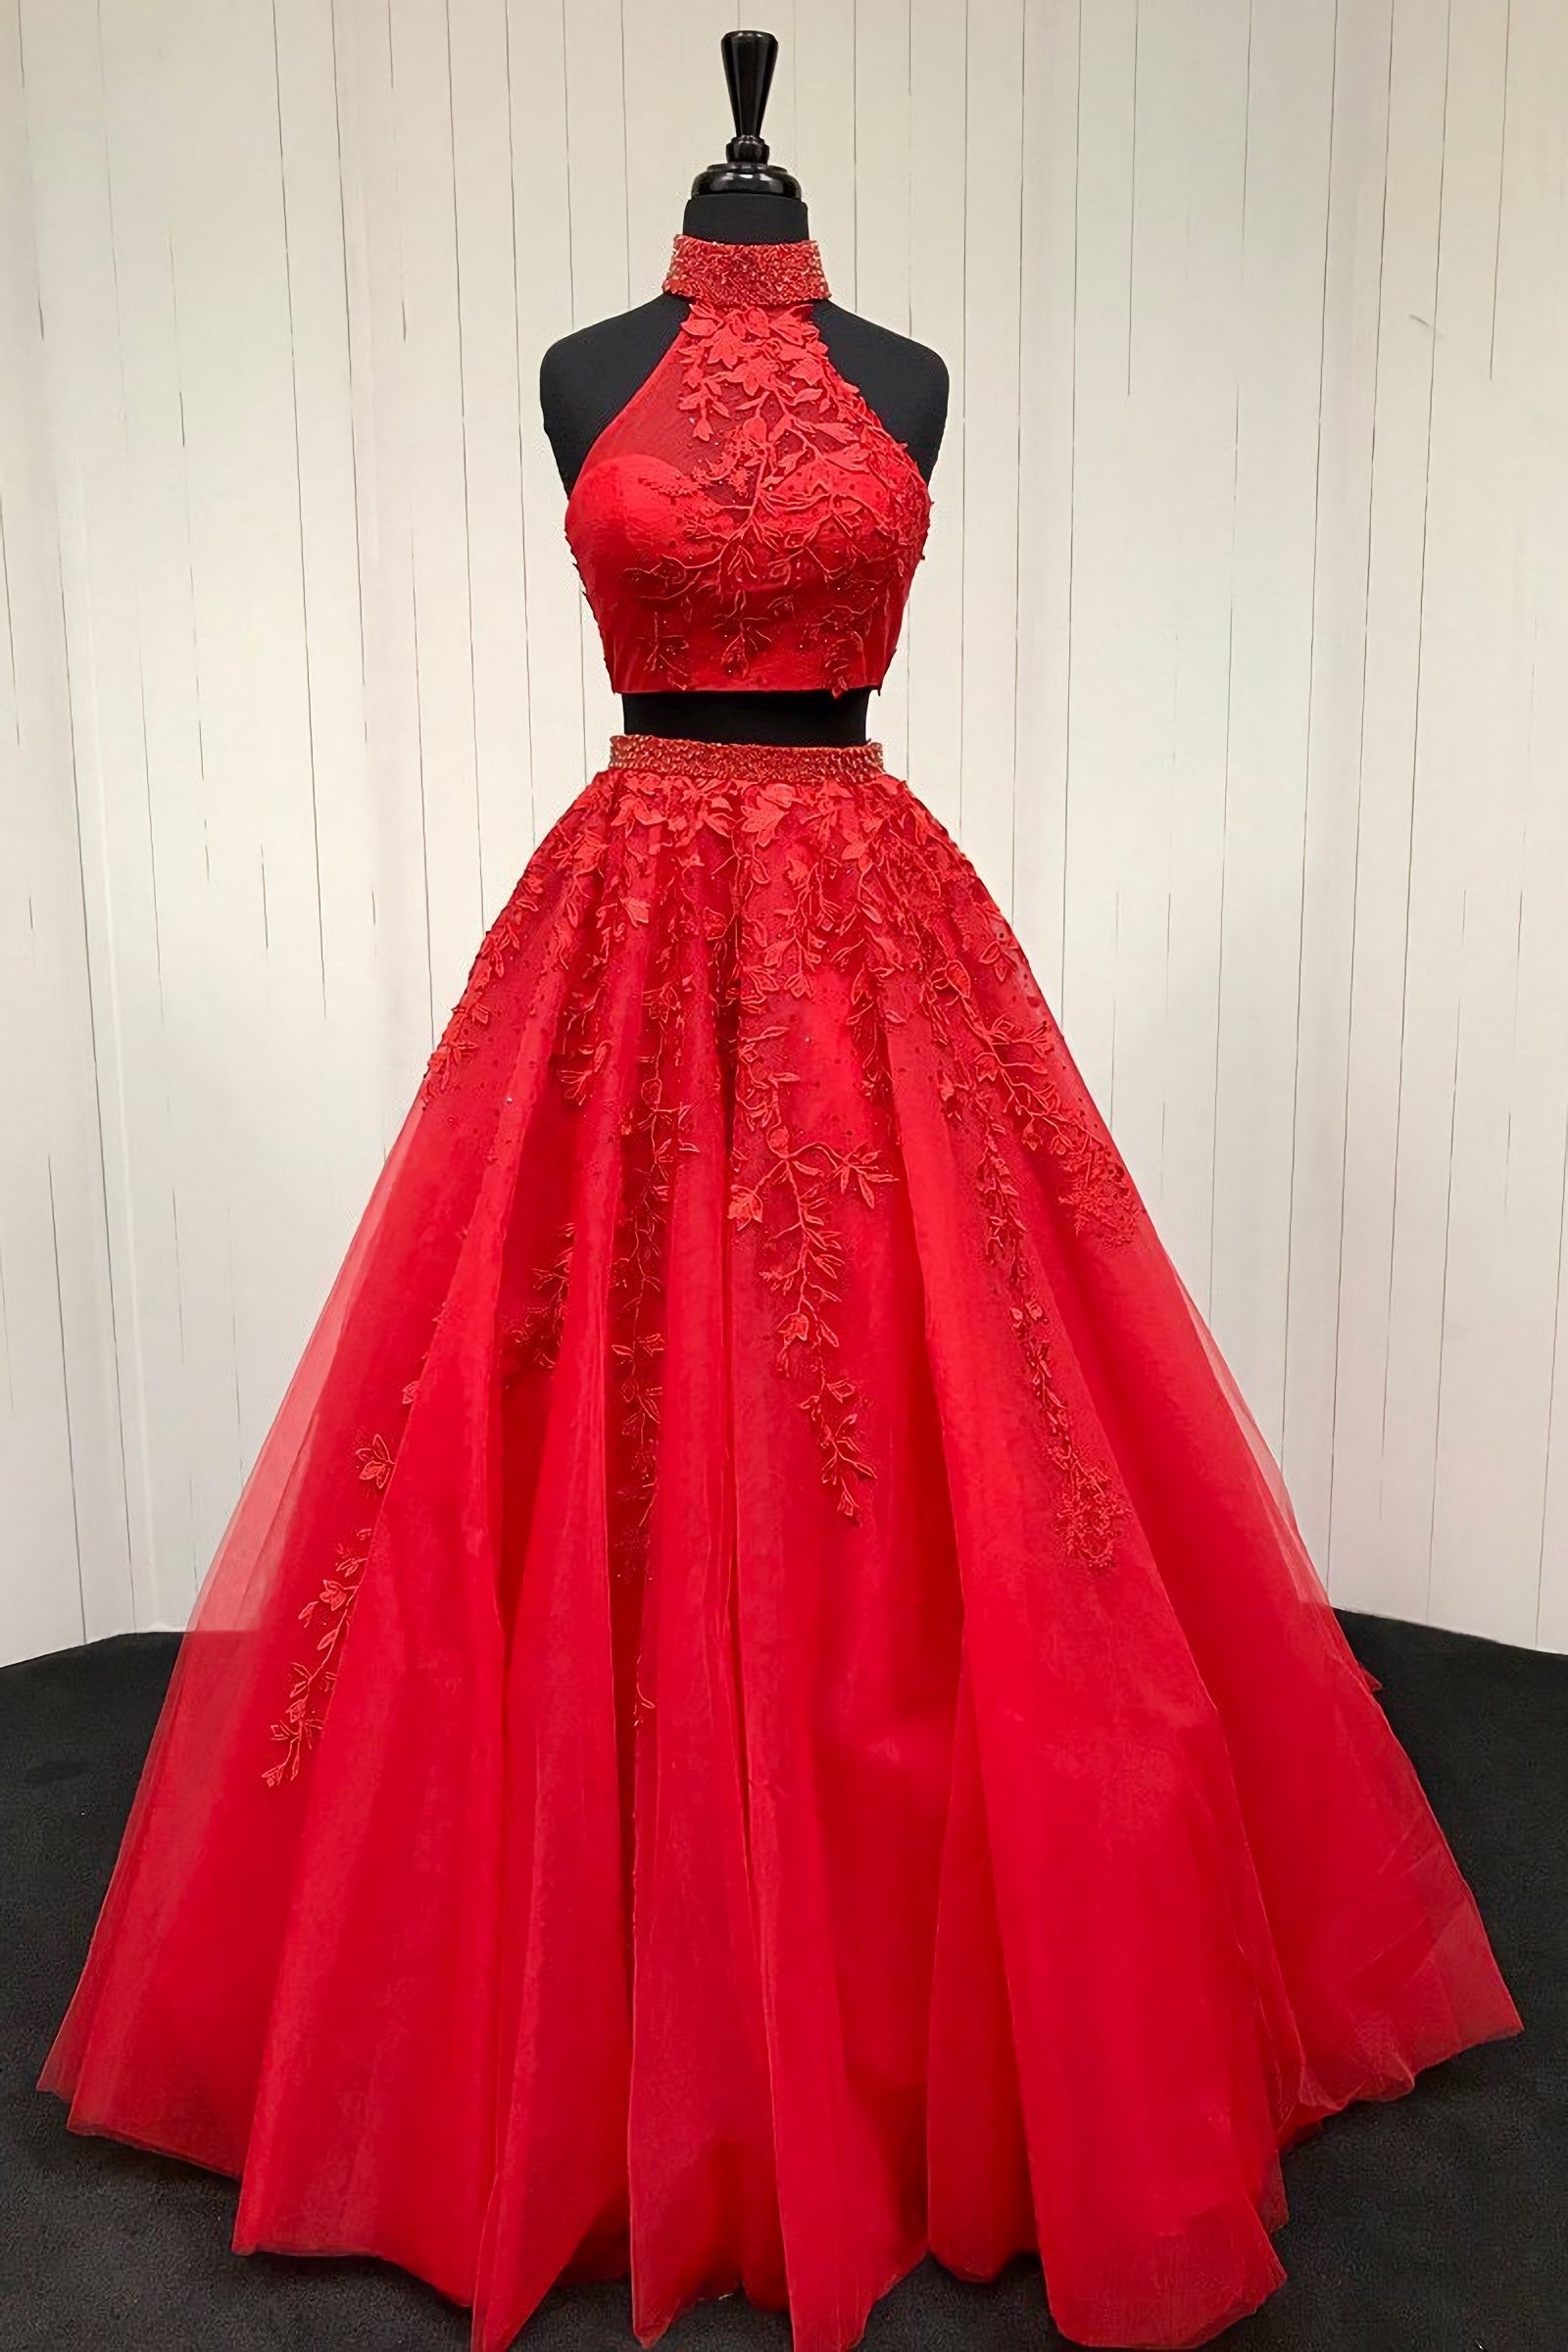 Halter Two Piece Tulle Red Long Corset Prom Dress With Beaded Appliques Gowns, Party Dresses Black And Gold